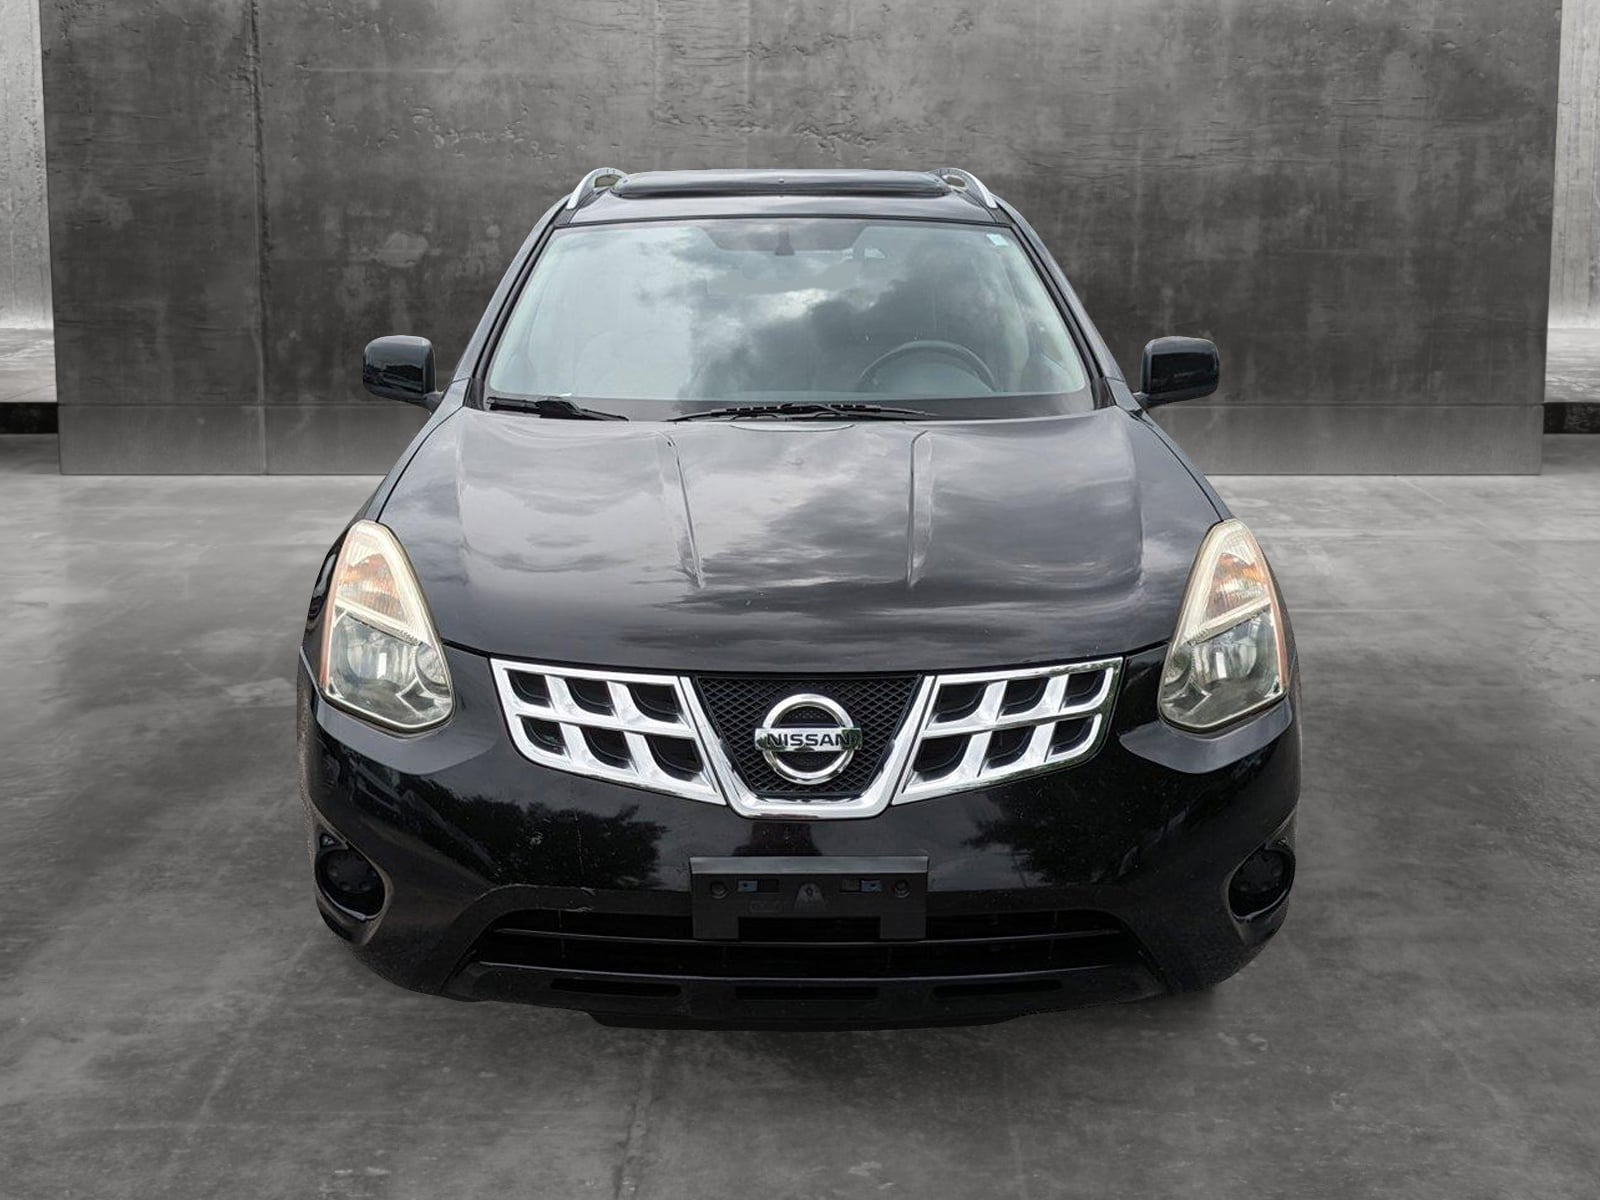 Used 2011 Nissan Rogue SV with VIN JN8AS5MT6BW563235 for sale in Mobile, AL